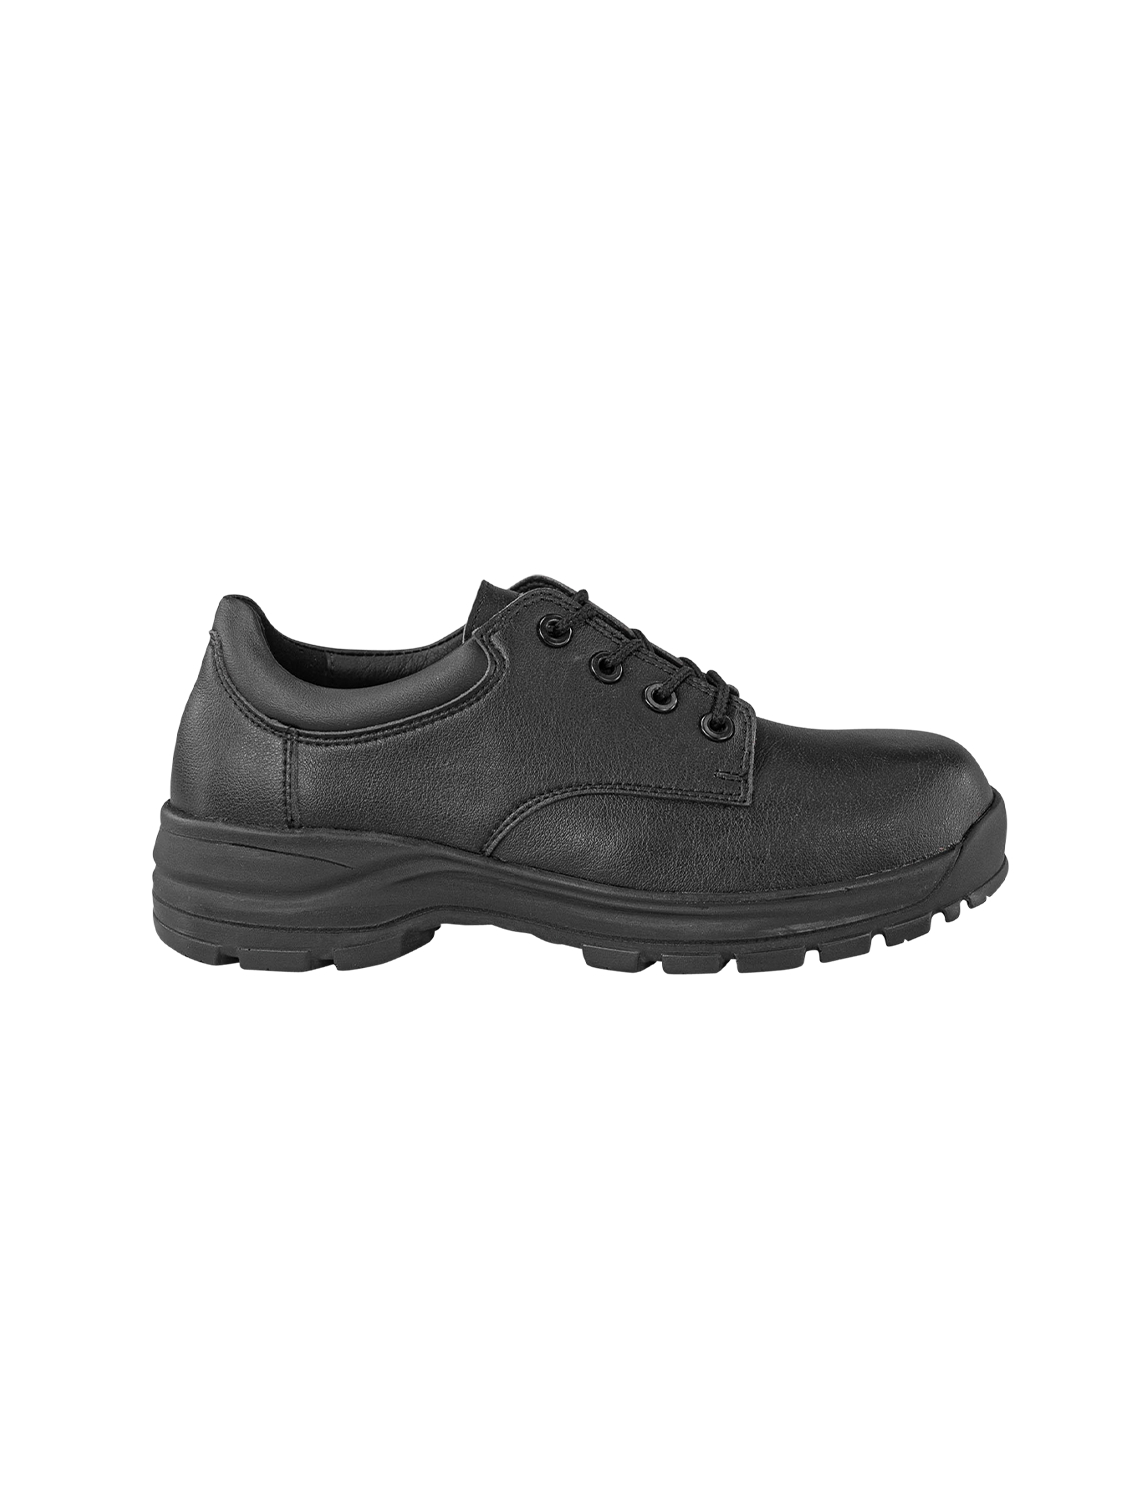 Products by NESKRID - Work- and Safety Footwear